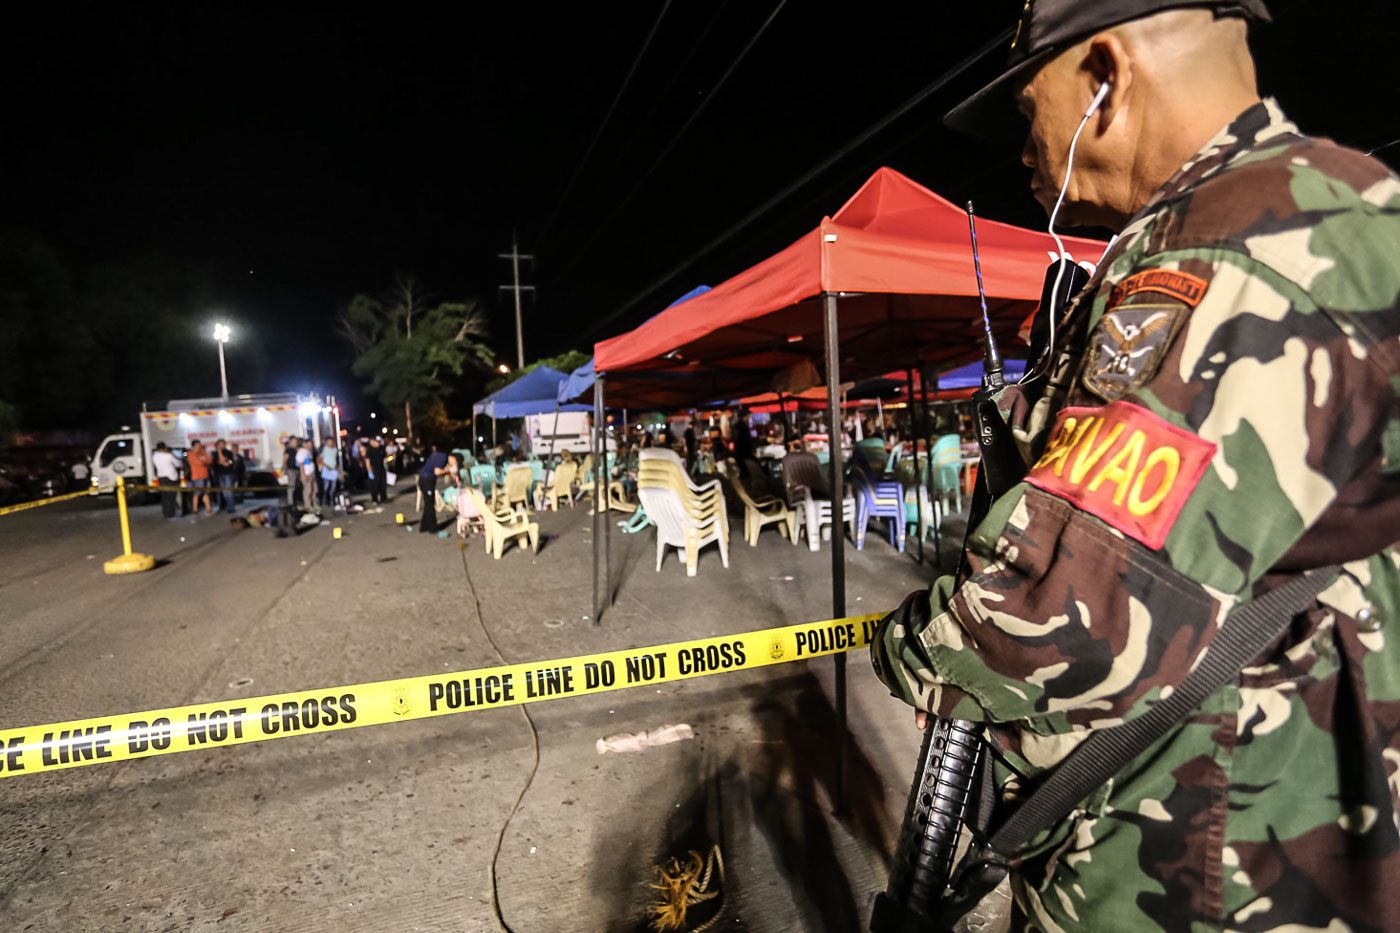 No curfew under ‘state of lawlessness’ – DND chief